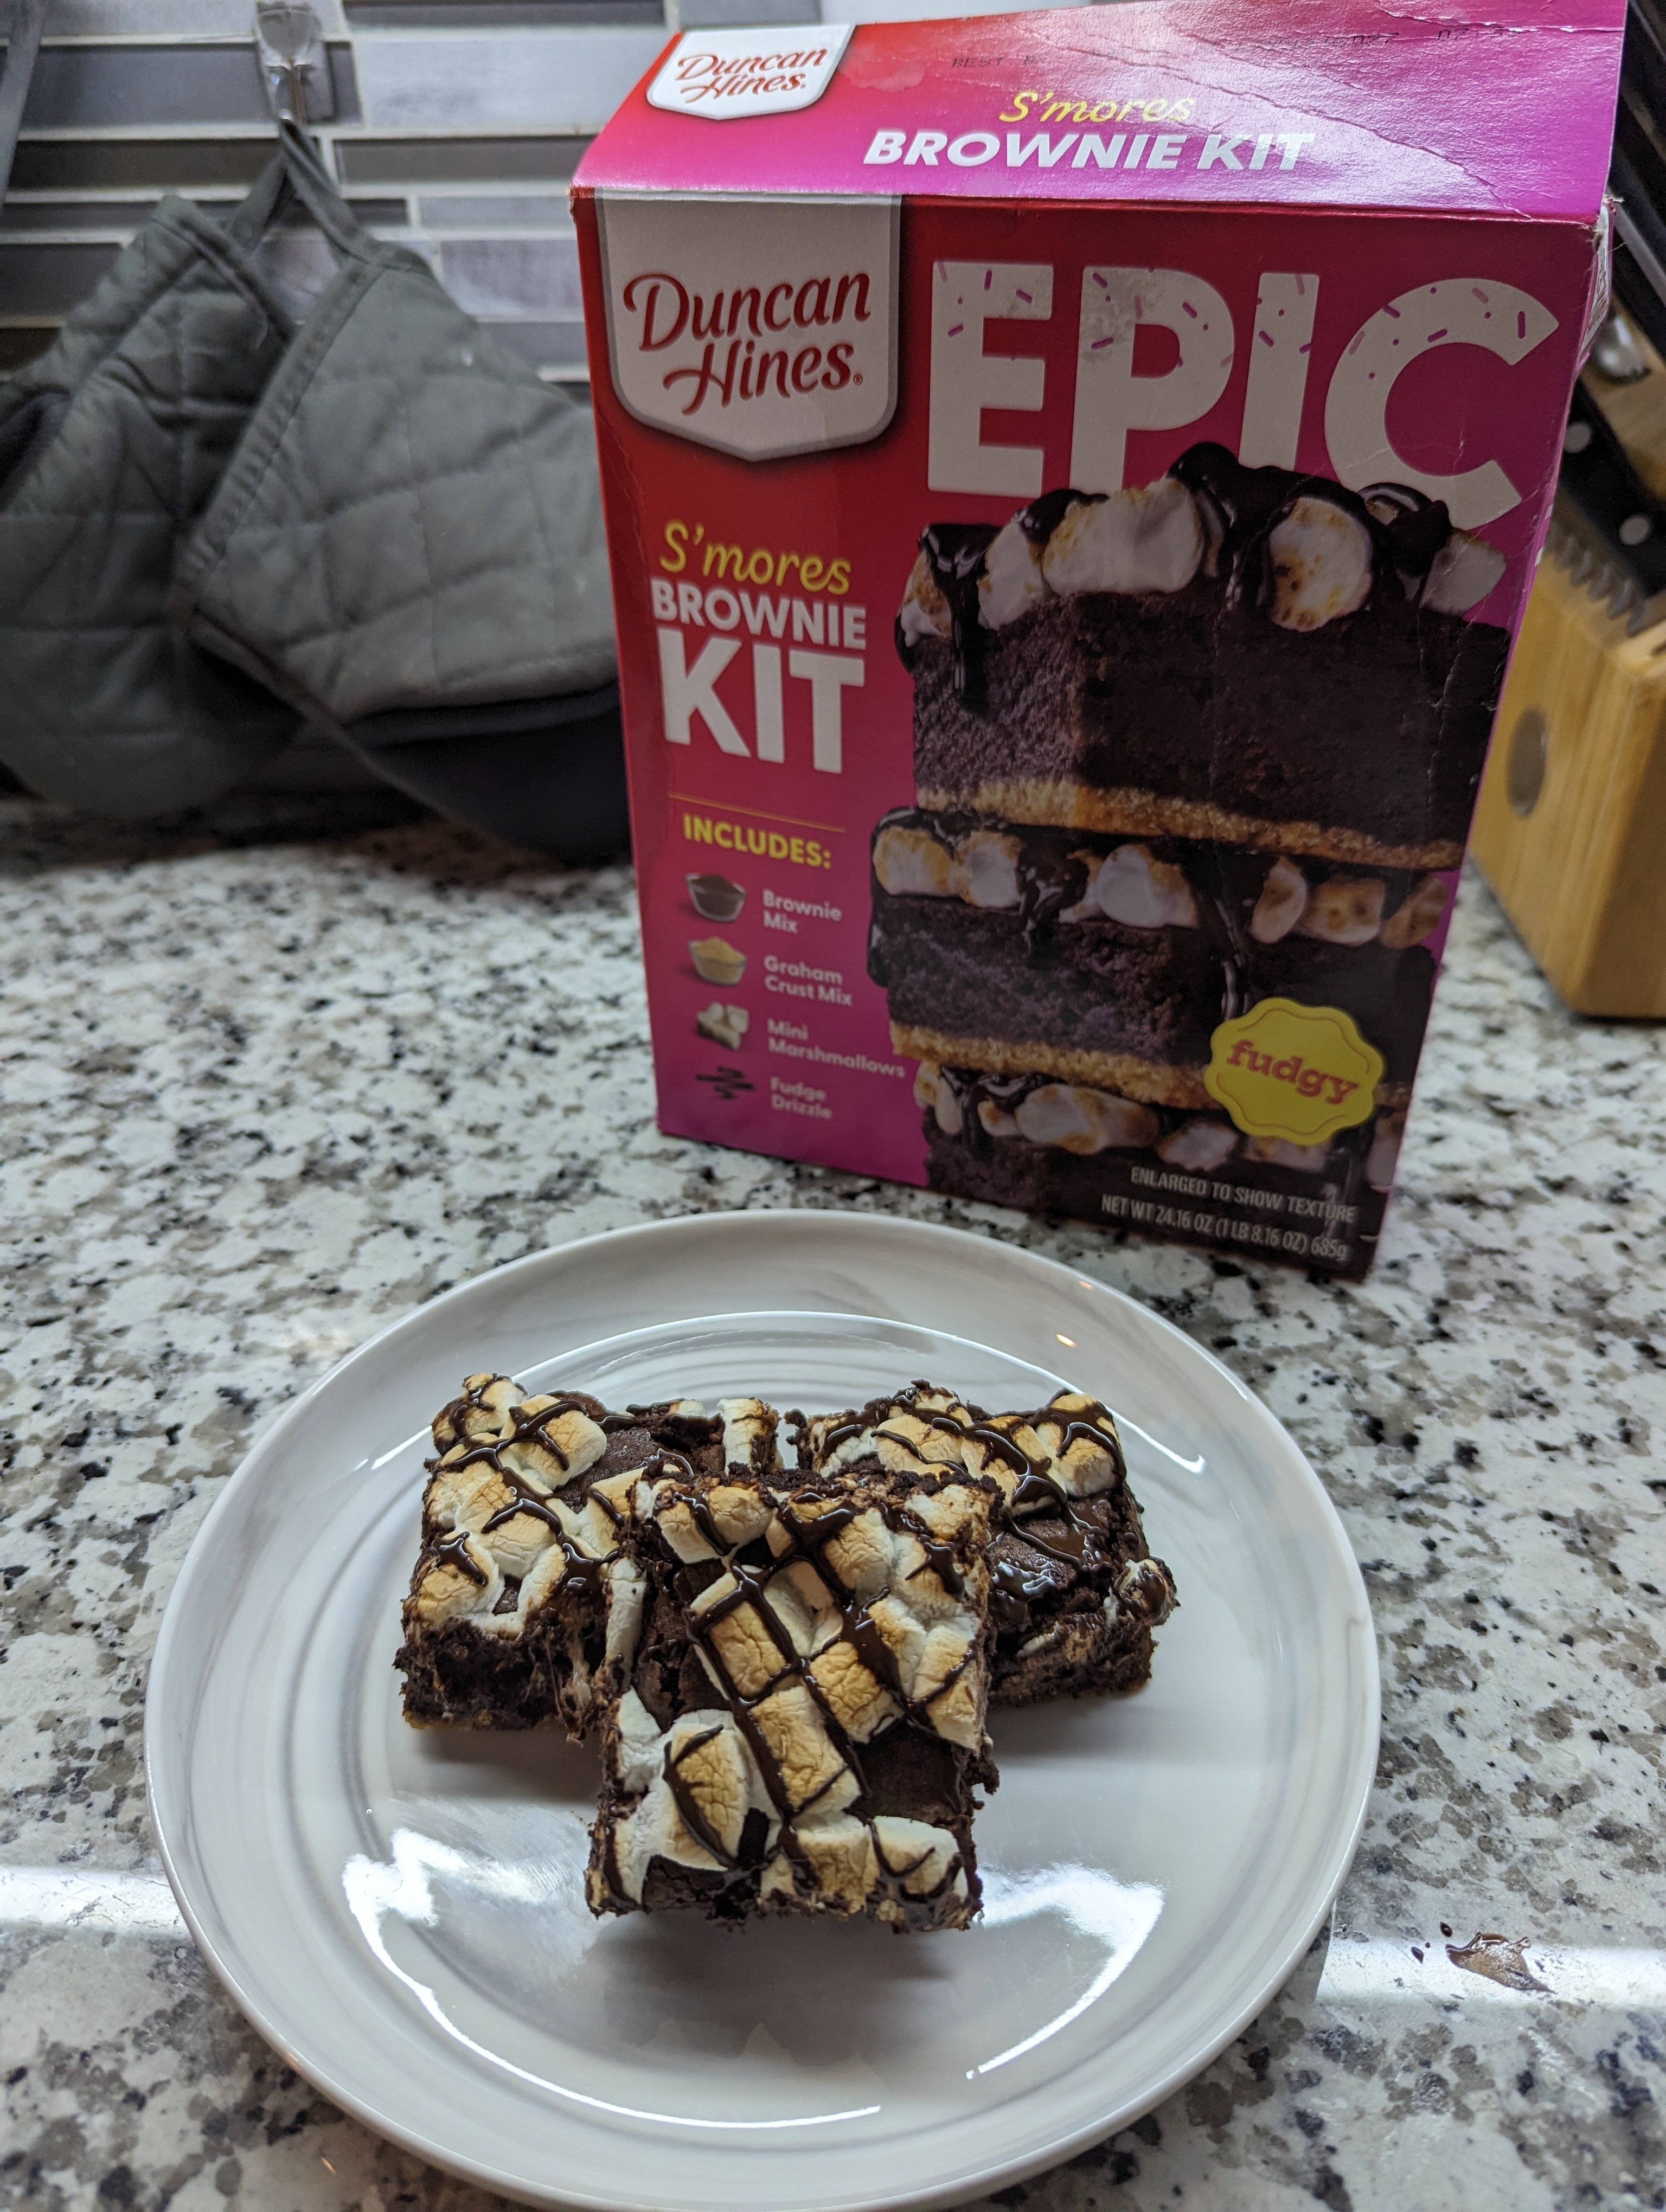 Testing out Duncan Hines’ S’mores Brownie Kit EPIC